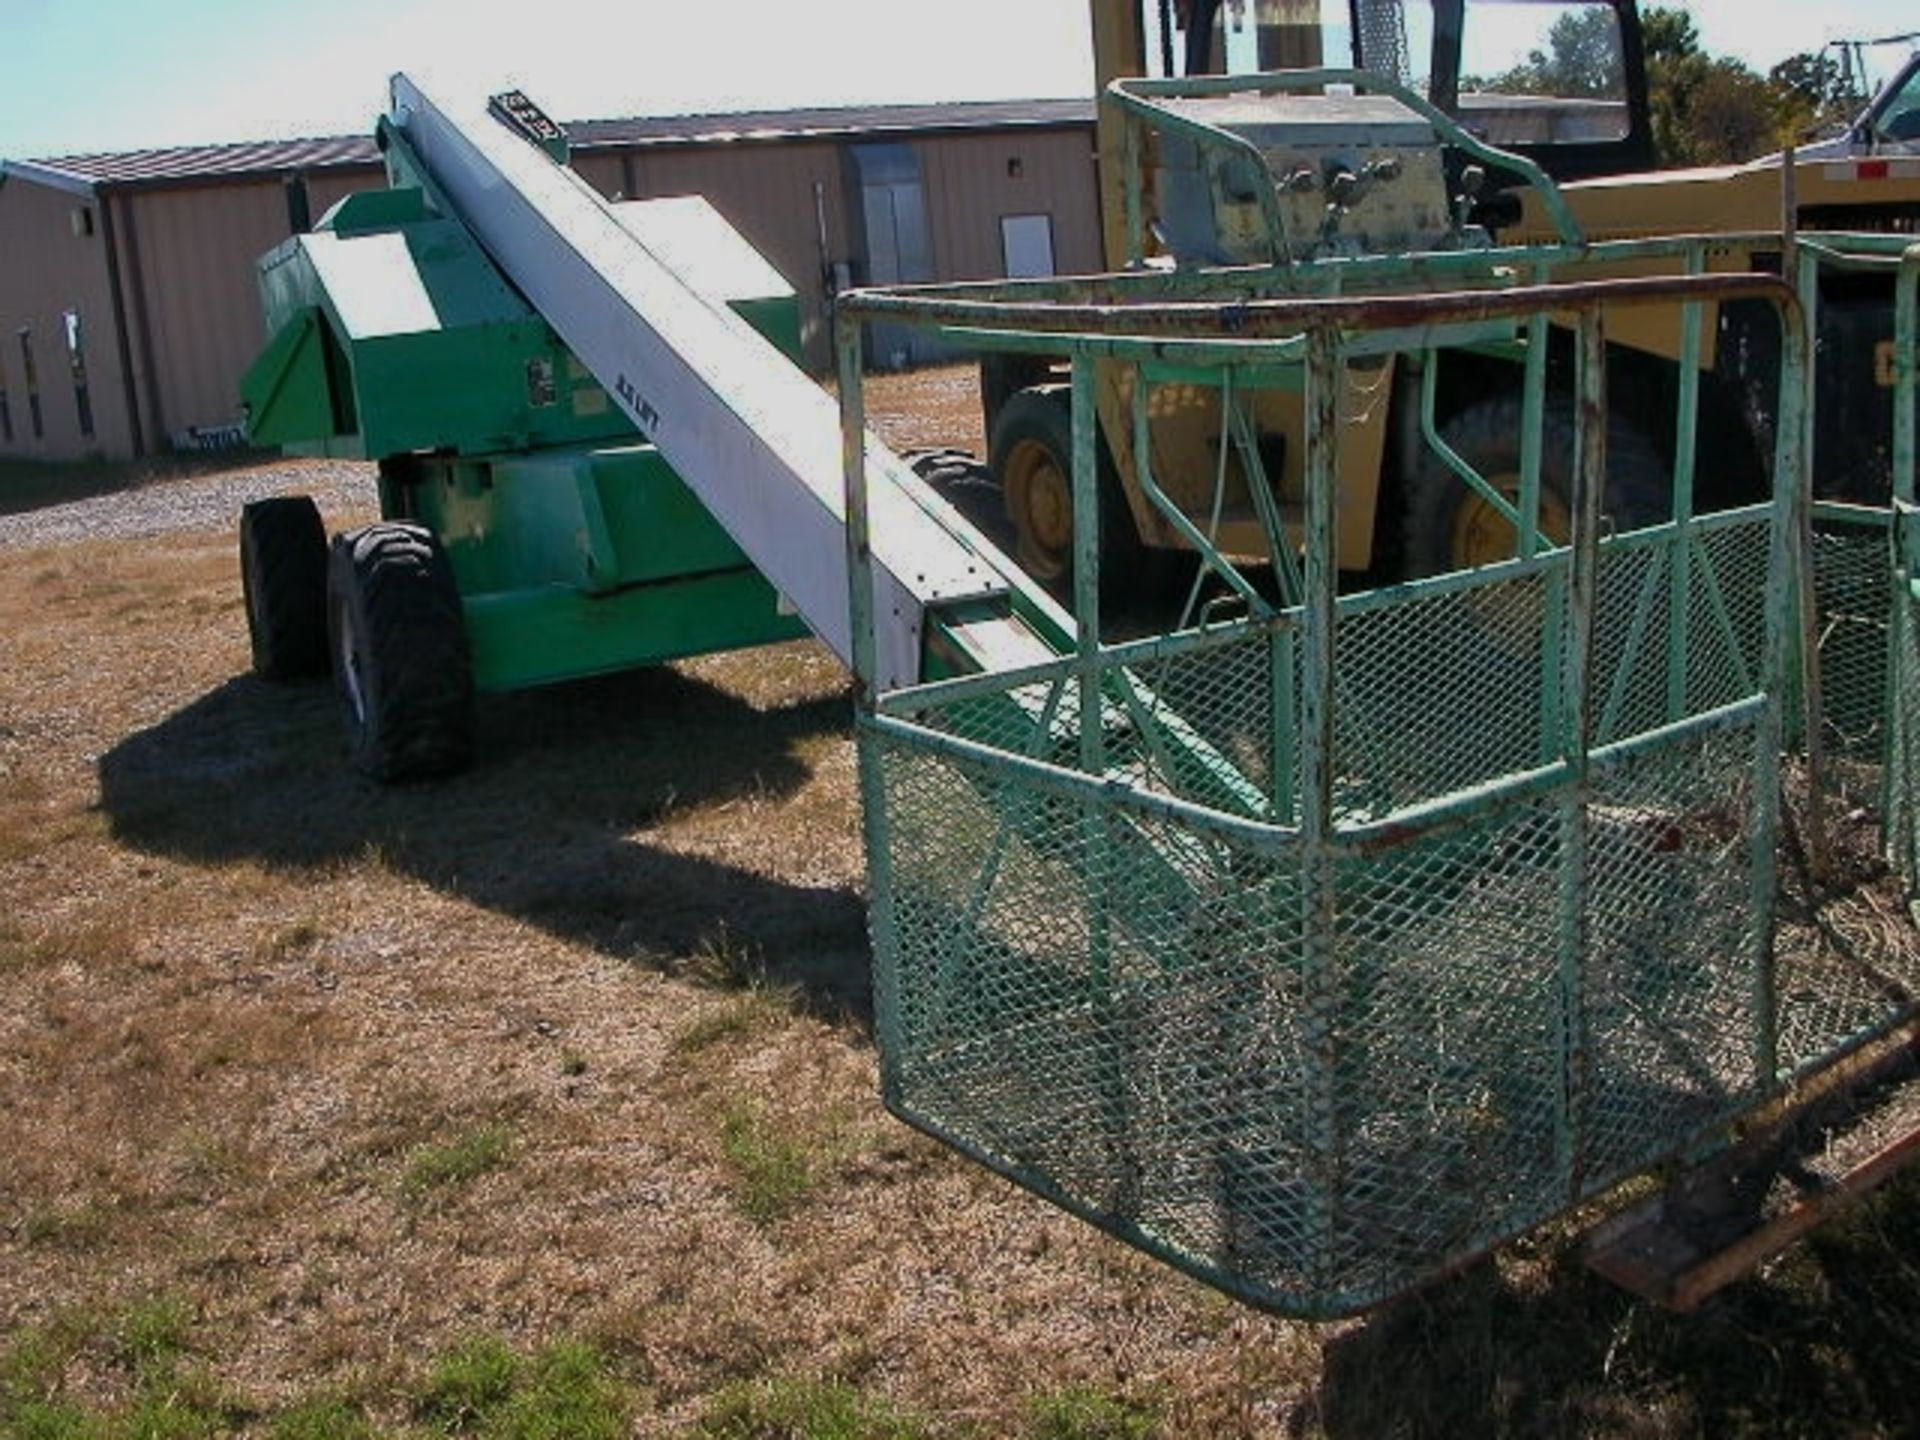 JLG Lift 60â�,��"� Reach (Man Cage) Good Working Condition per/Owner Last 4 of SER. #6655 - Image 2 of 6